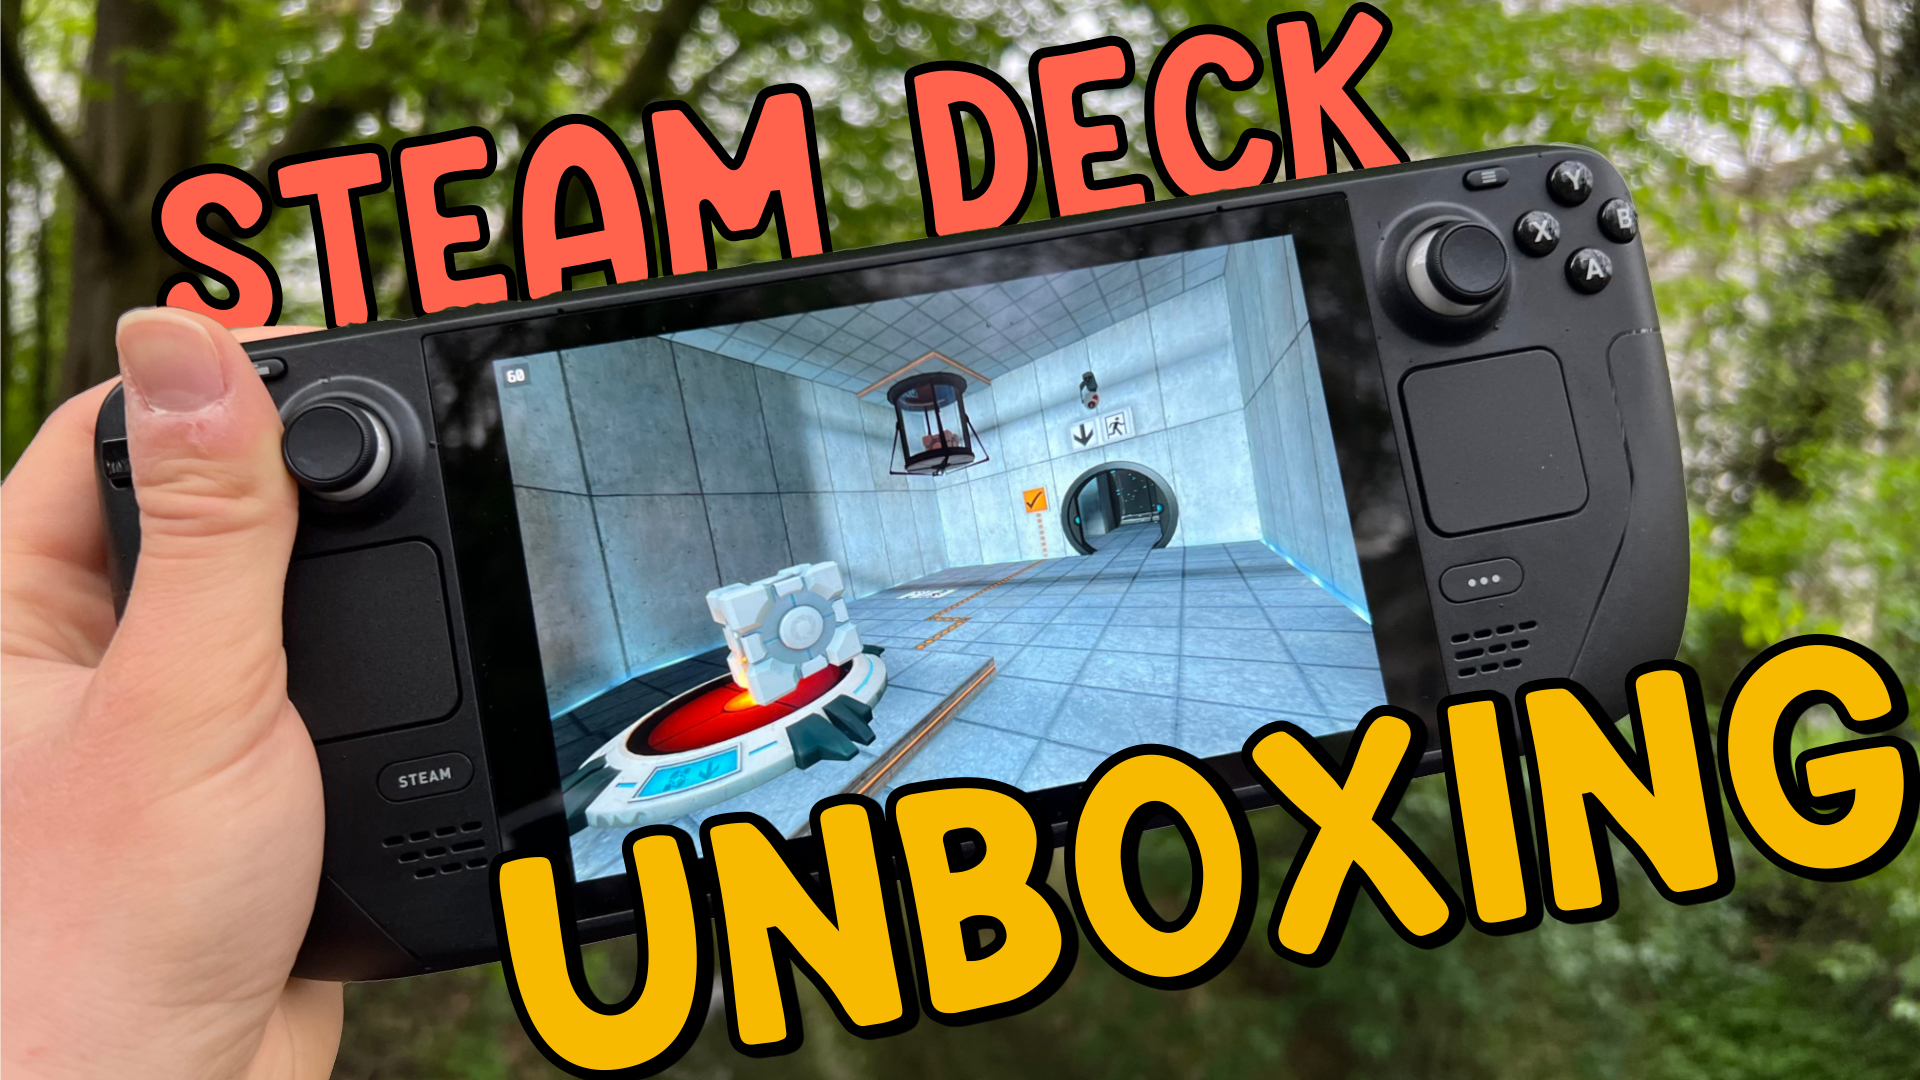 Click to see: Steam Deck Unboxing